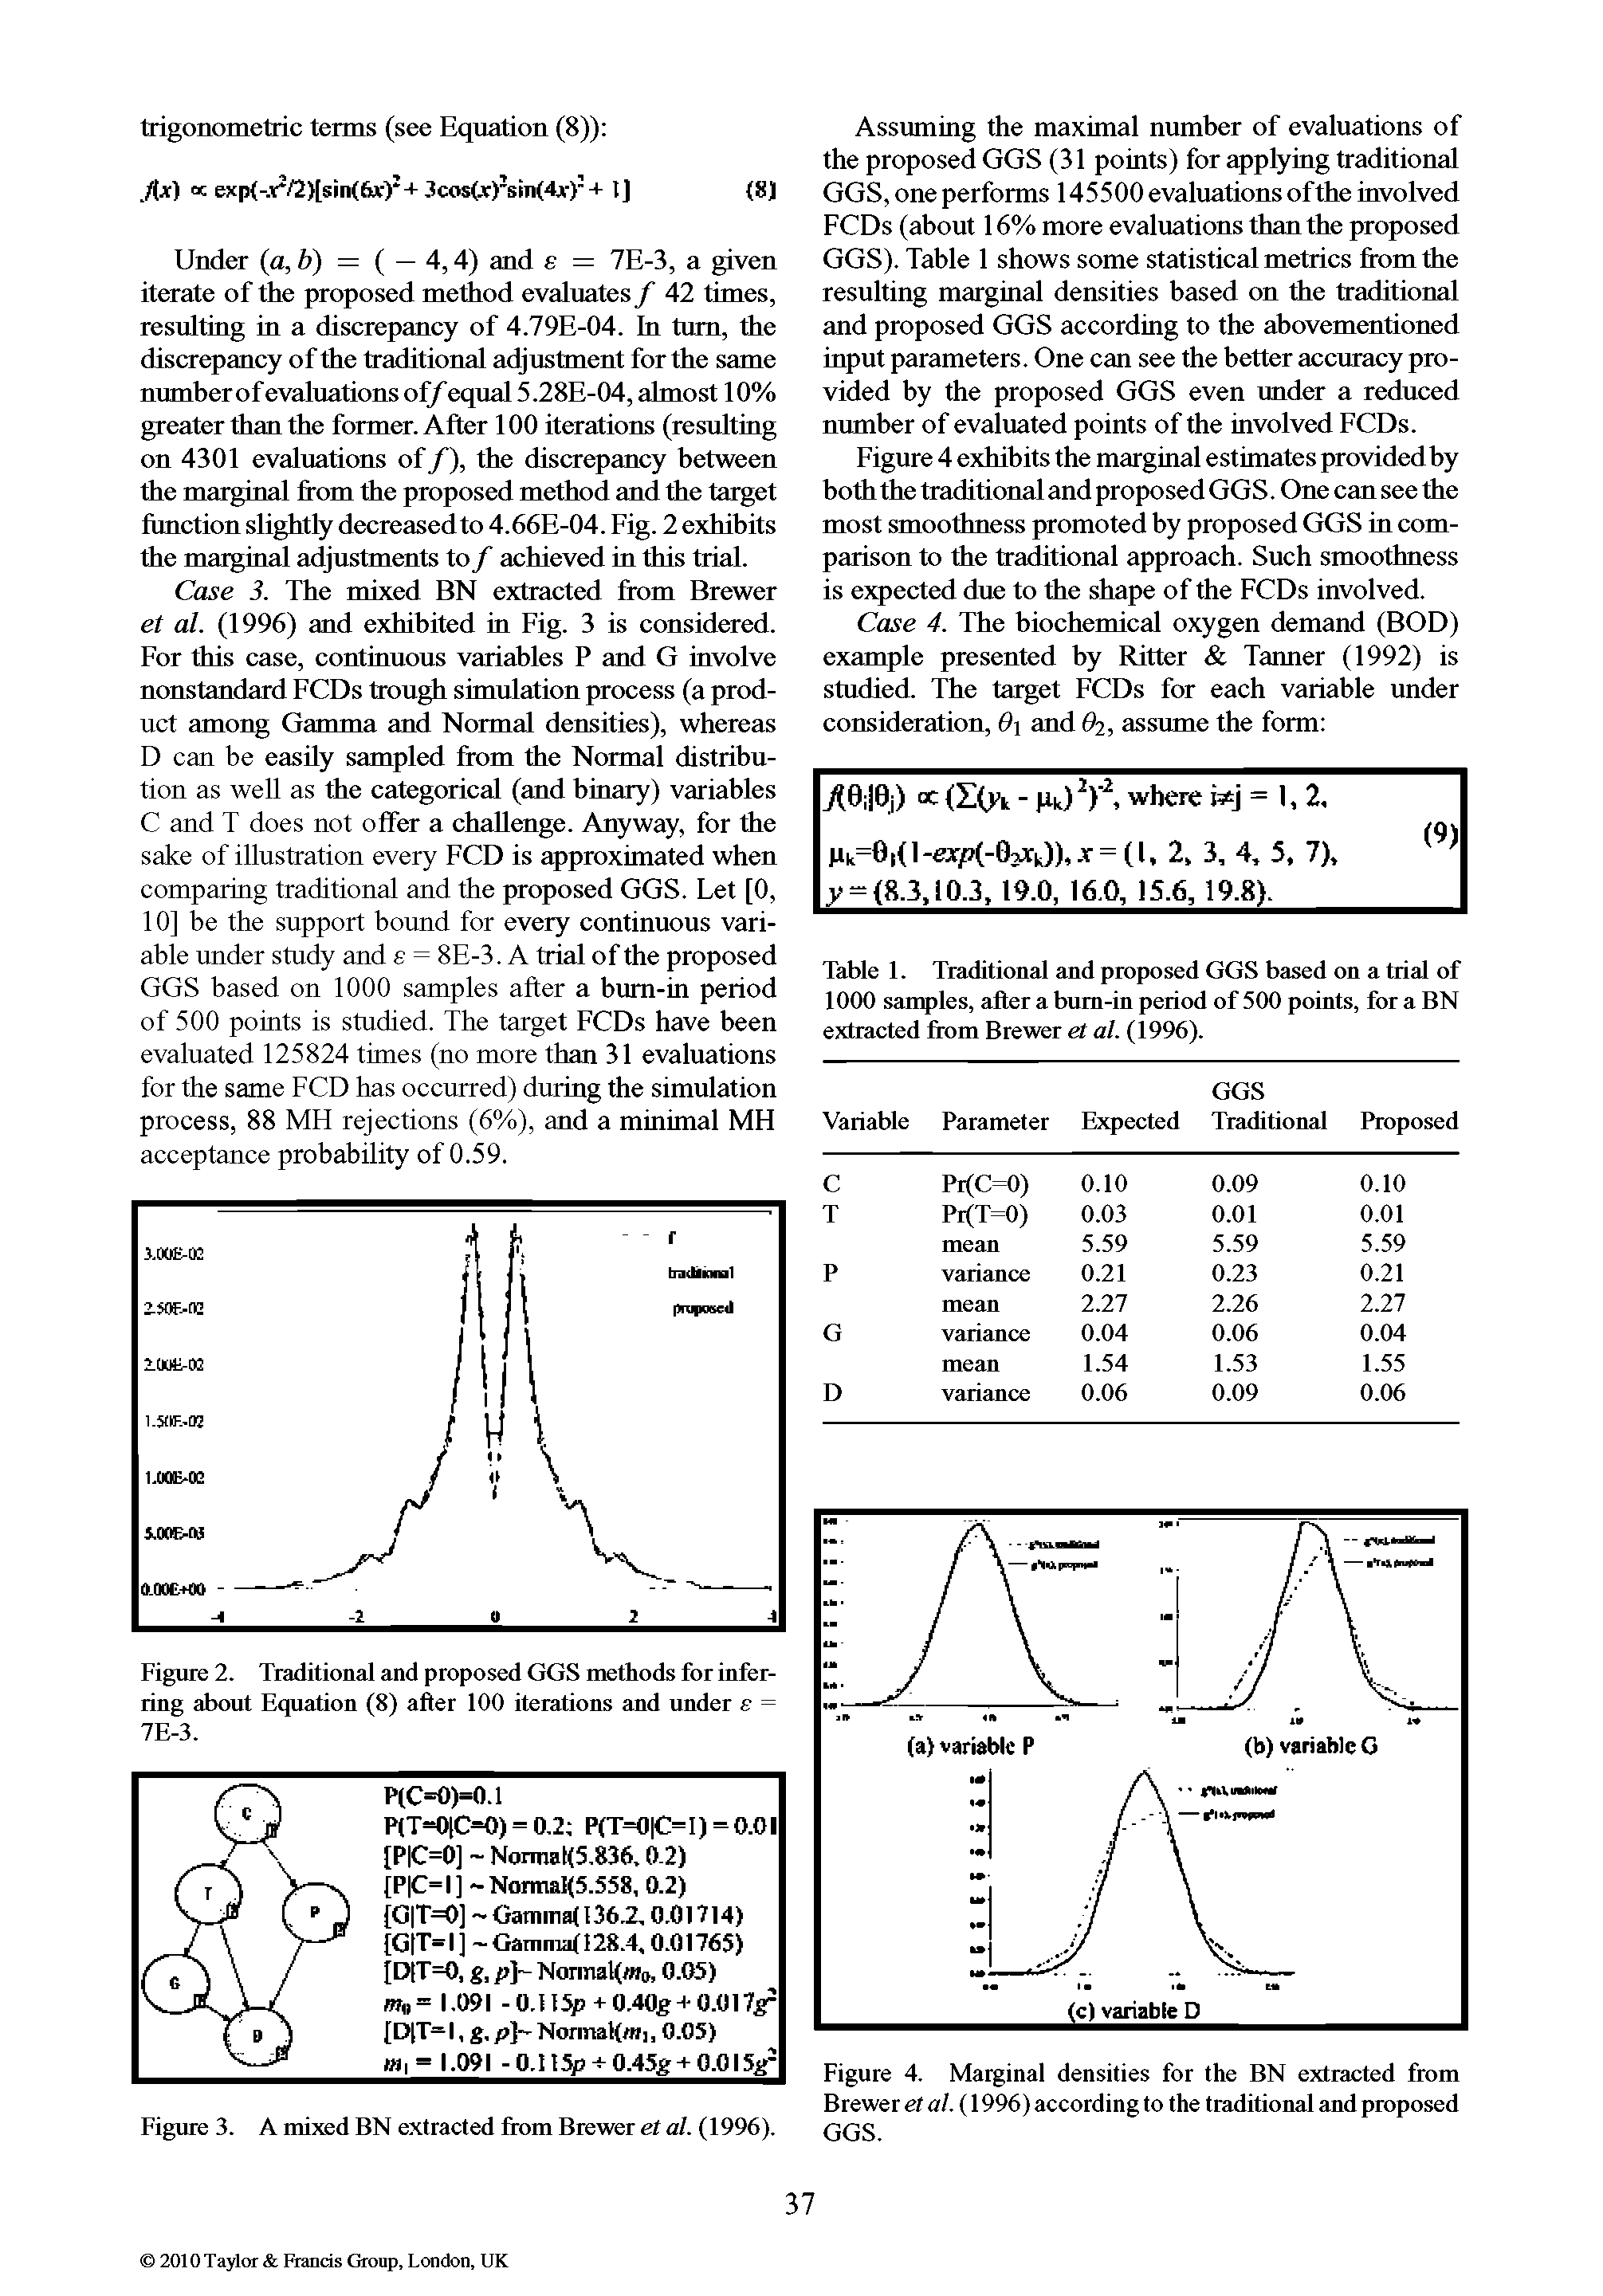 Figure 4. Marginal densities for the BN extracted from Brewer et al. (1996) according to the traditional and proposed GGS.